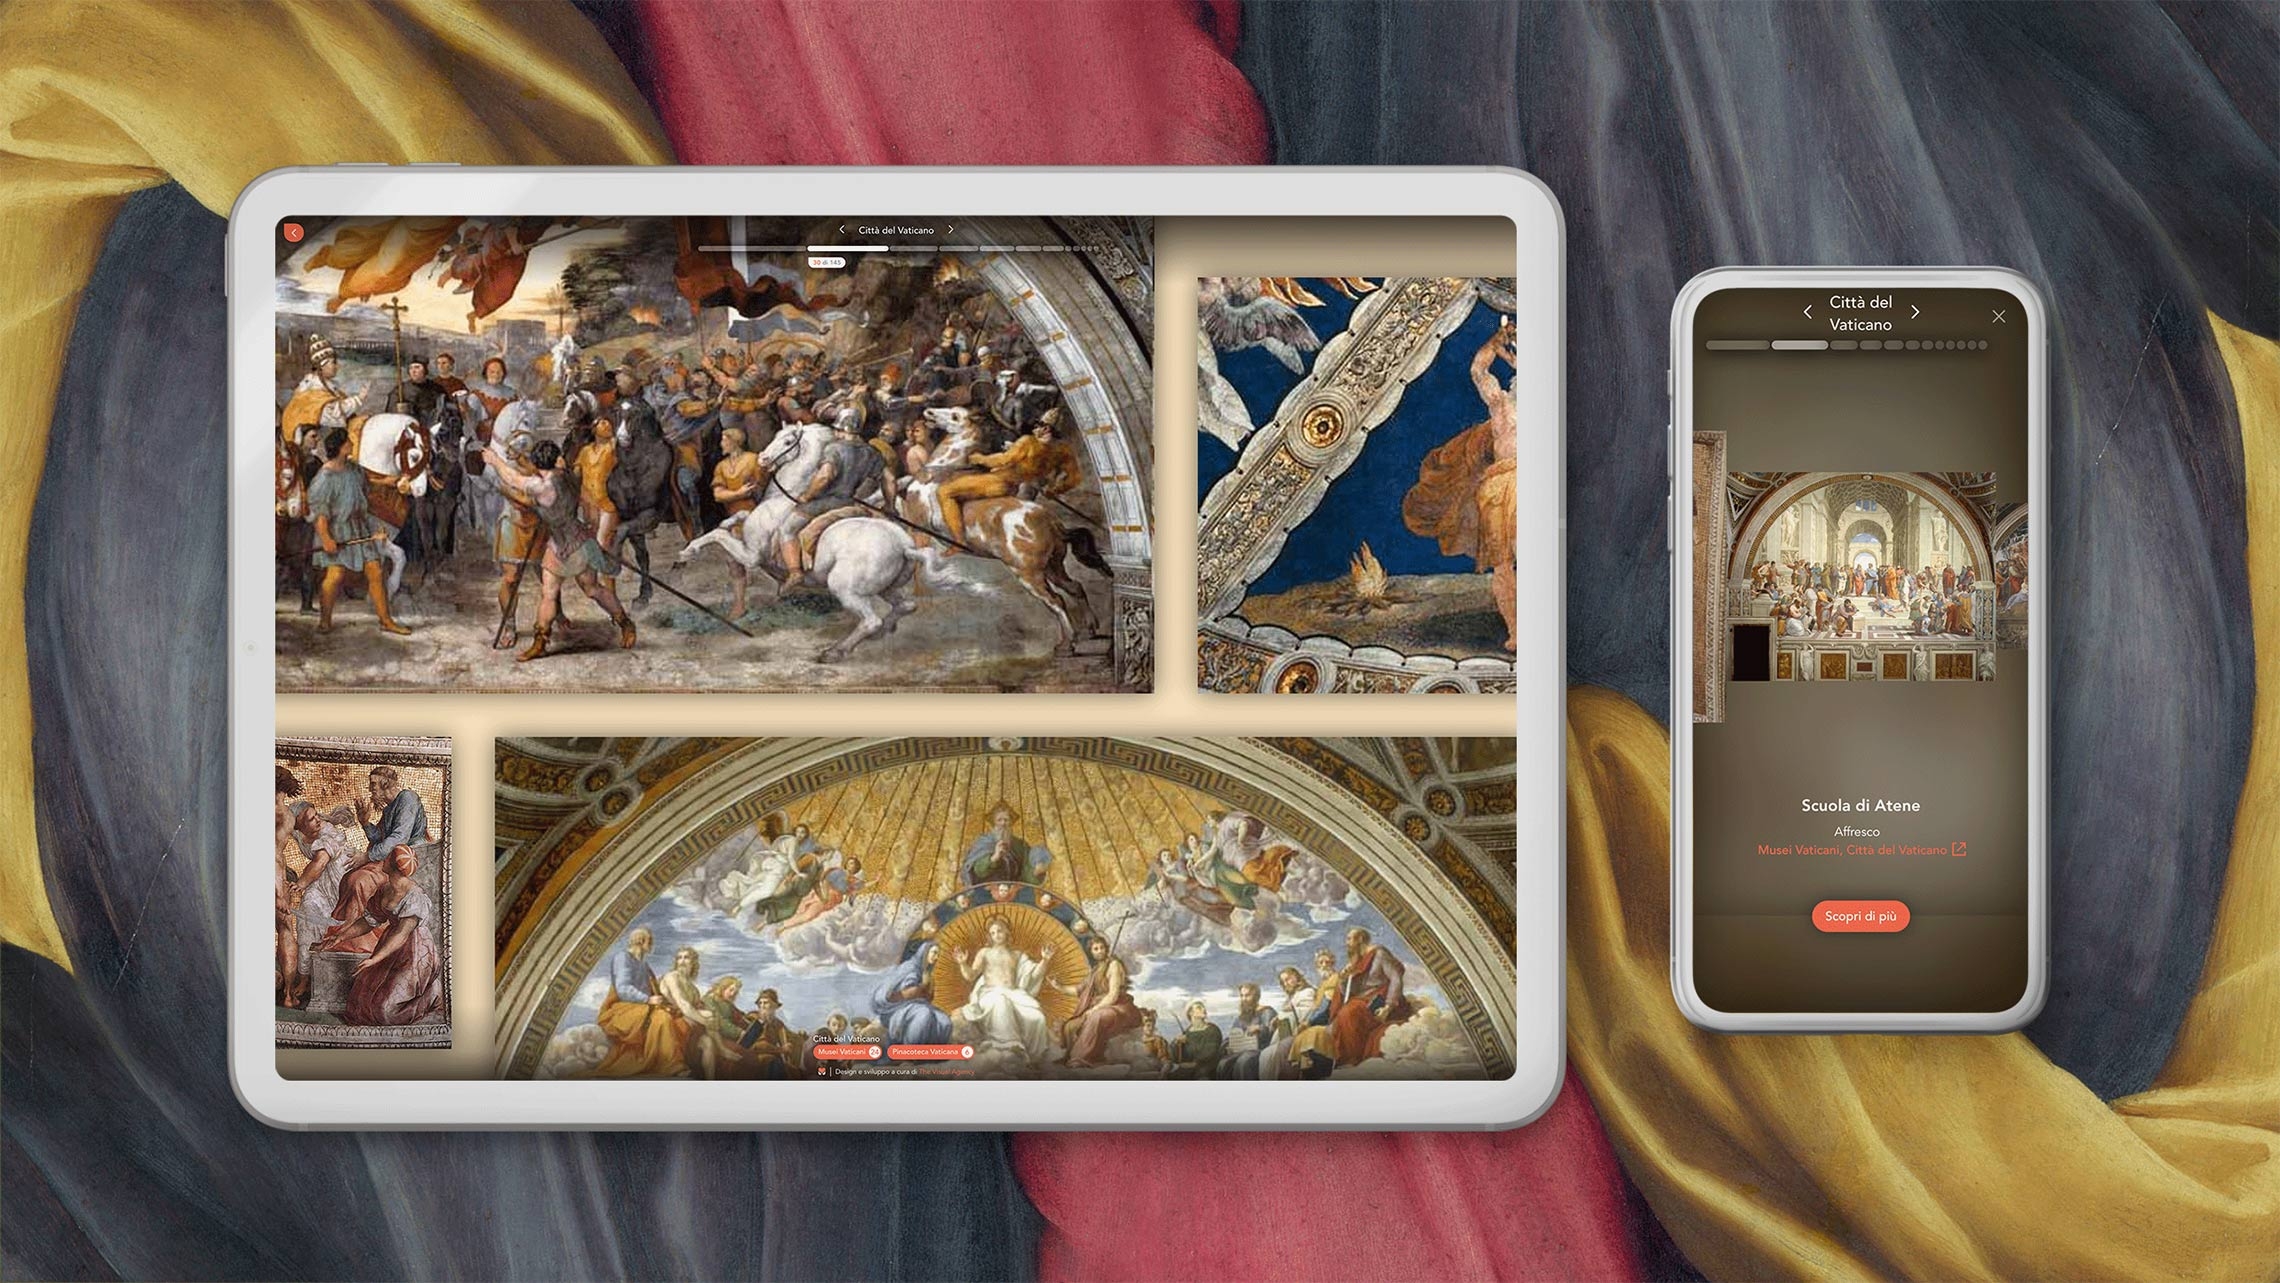 Raphael's digital exhibition on tablet and phone